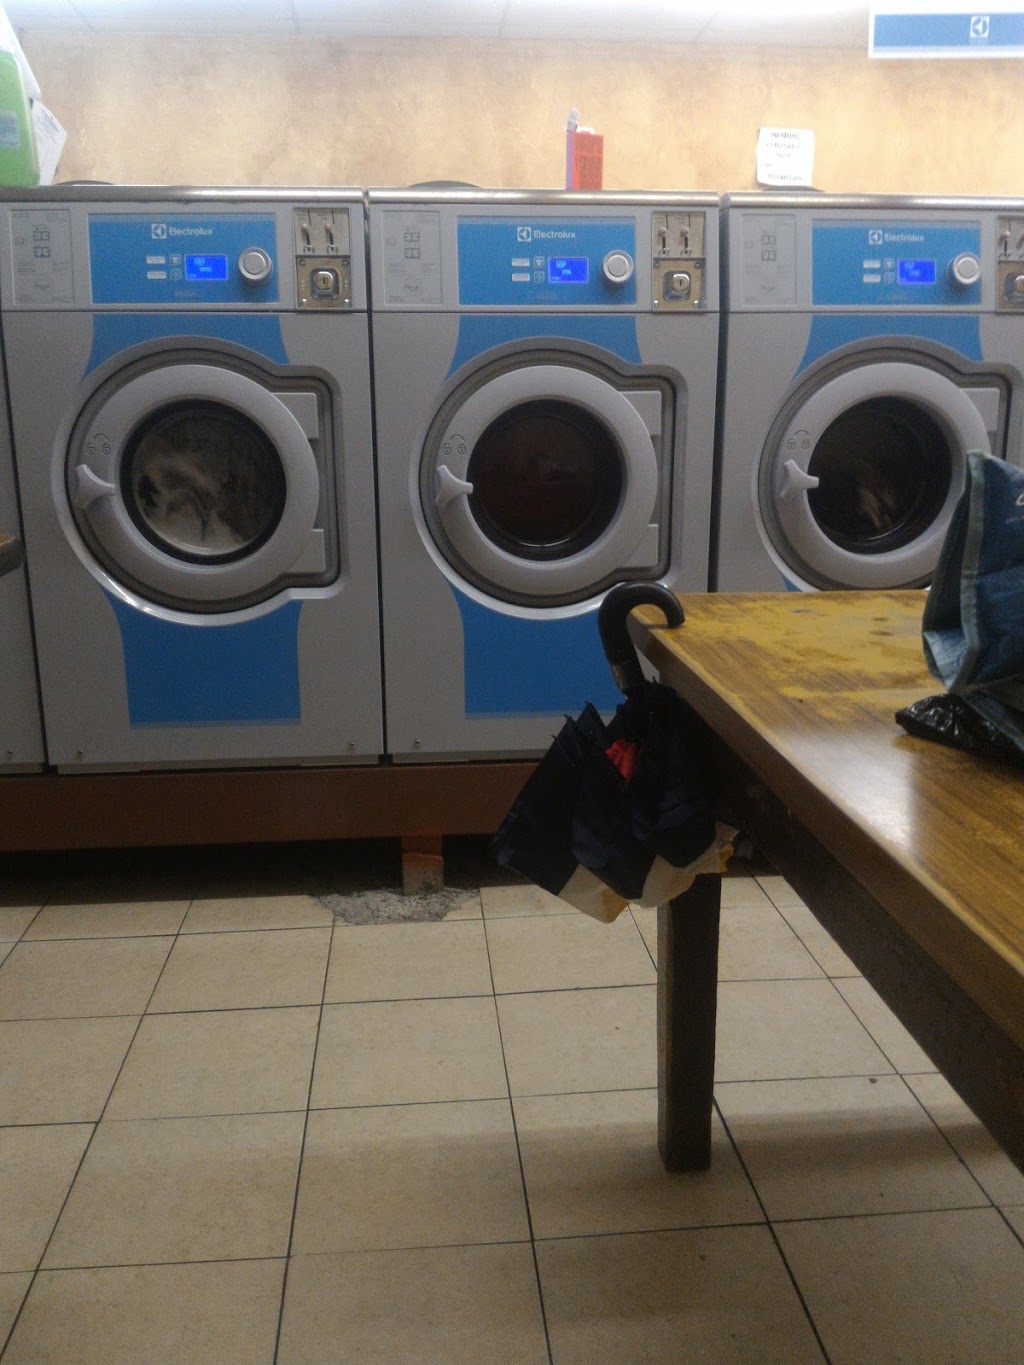 Self Service Laundromat | laundry | 904 Tecumseh Rd E, Windsor, ON N8X 2S6, Canada | 5192521710 OR +1 519-252-1710